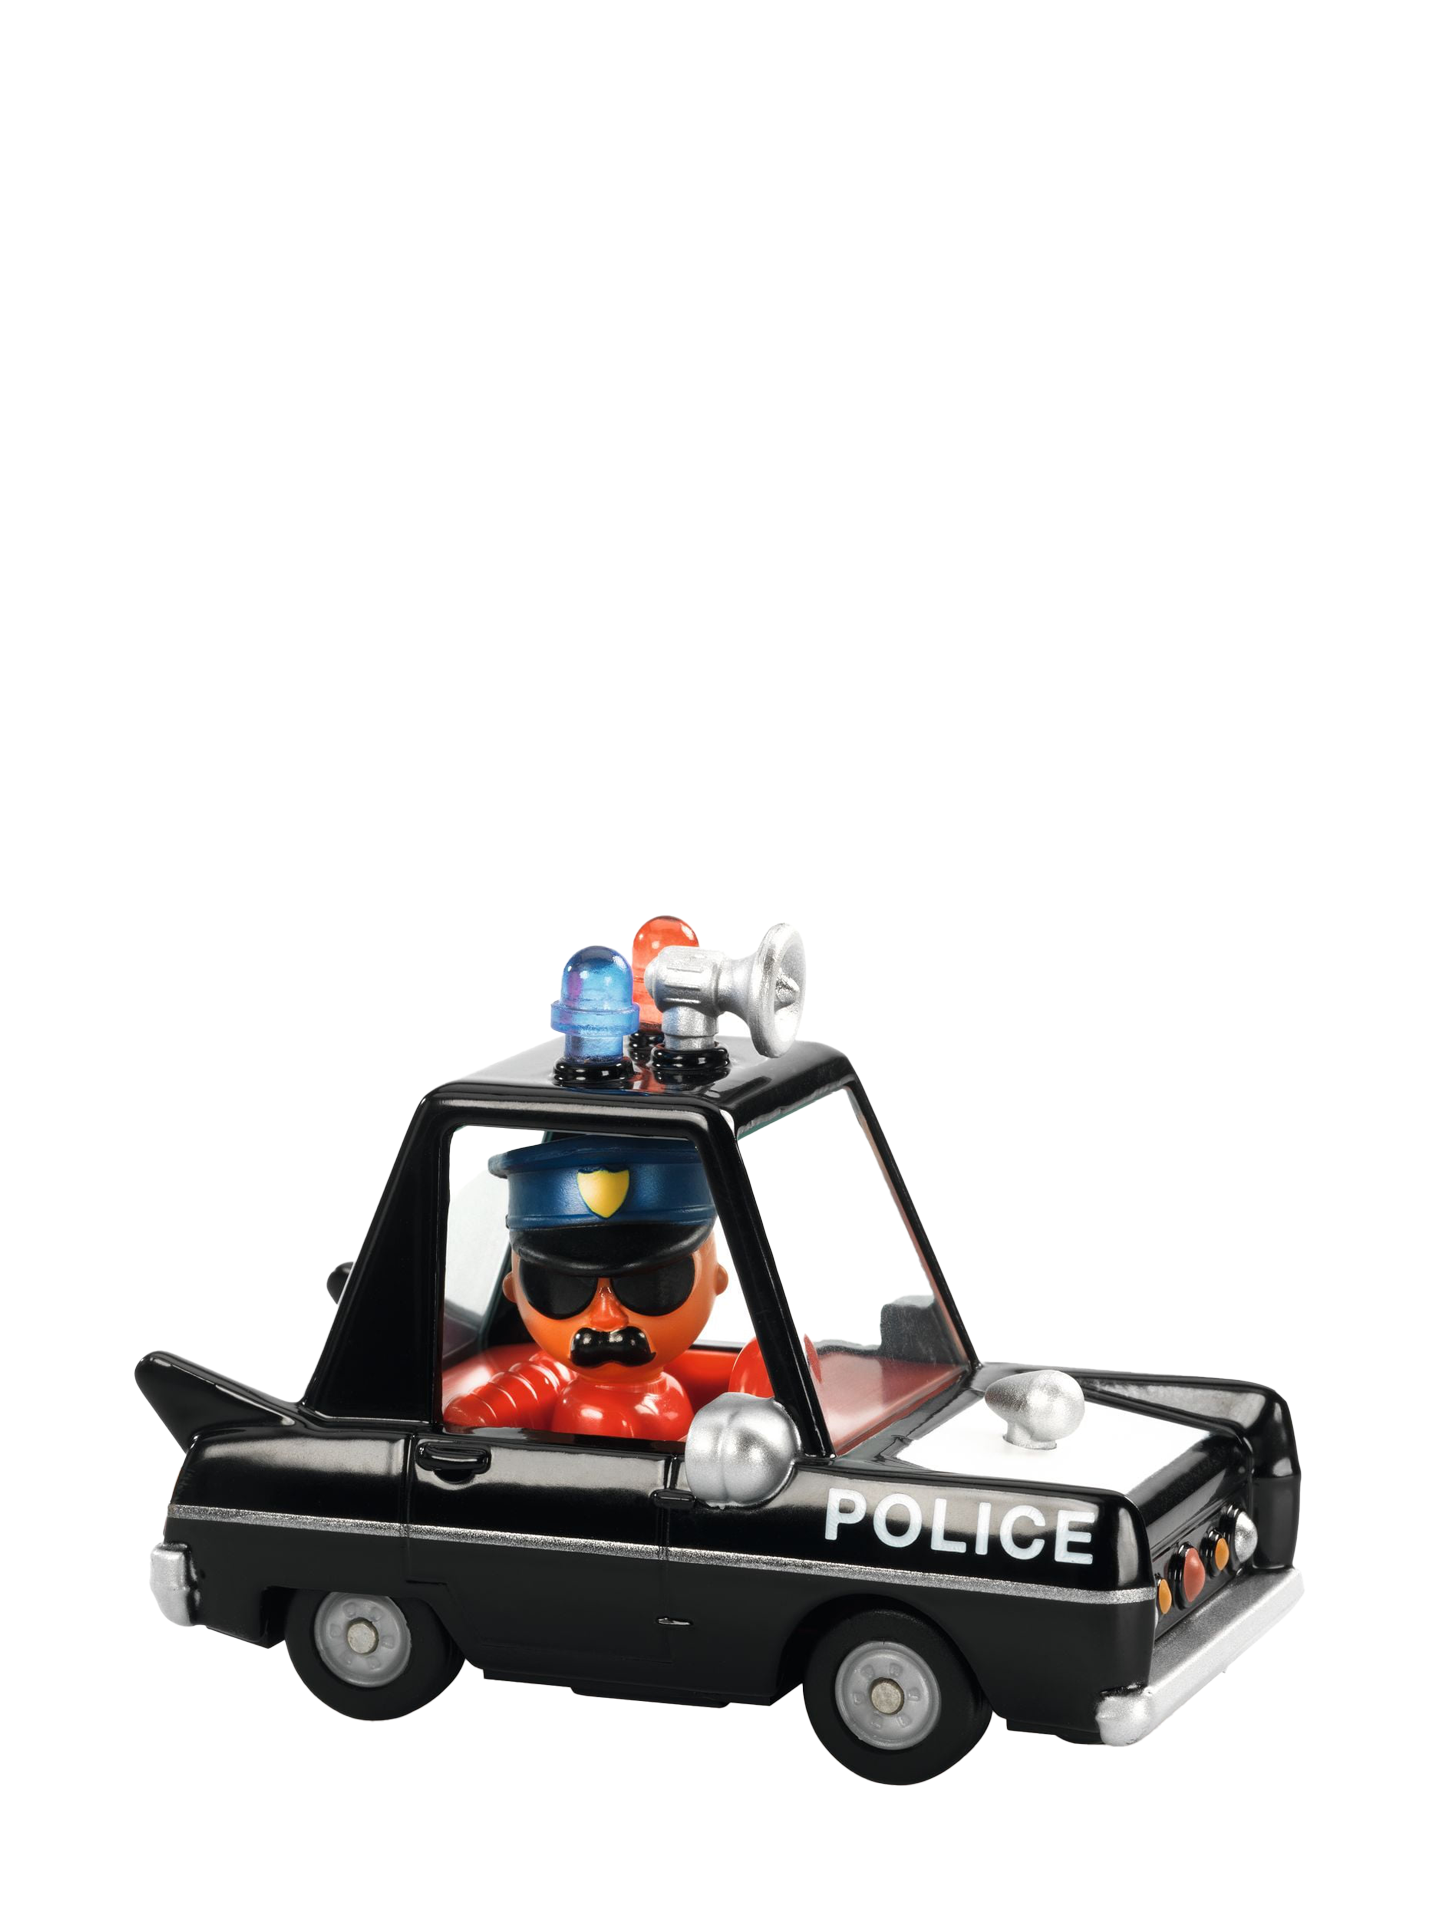 Hurry Police (Crazy motors collection)